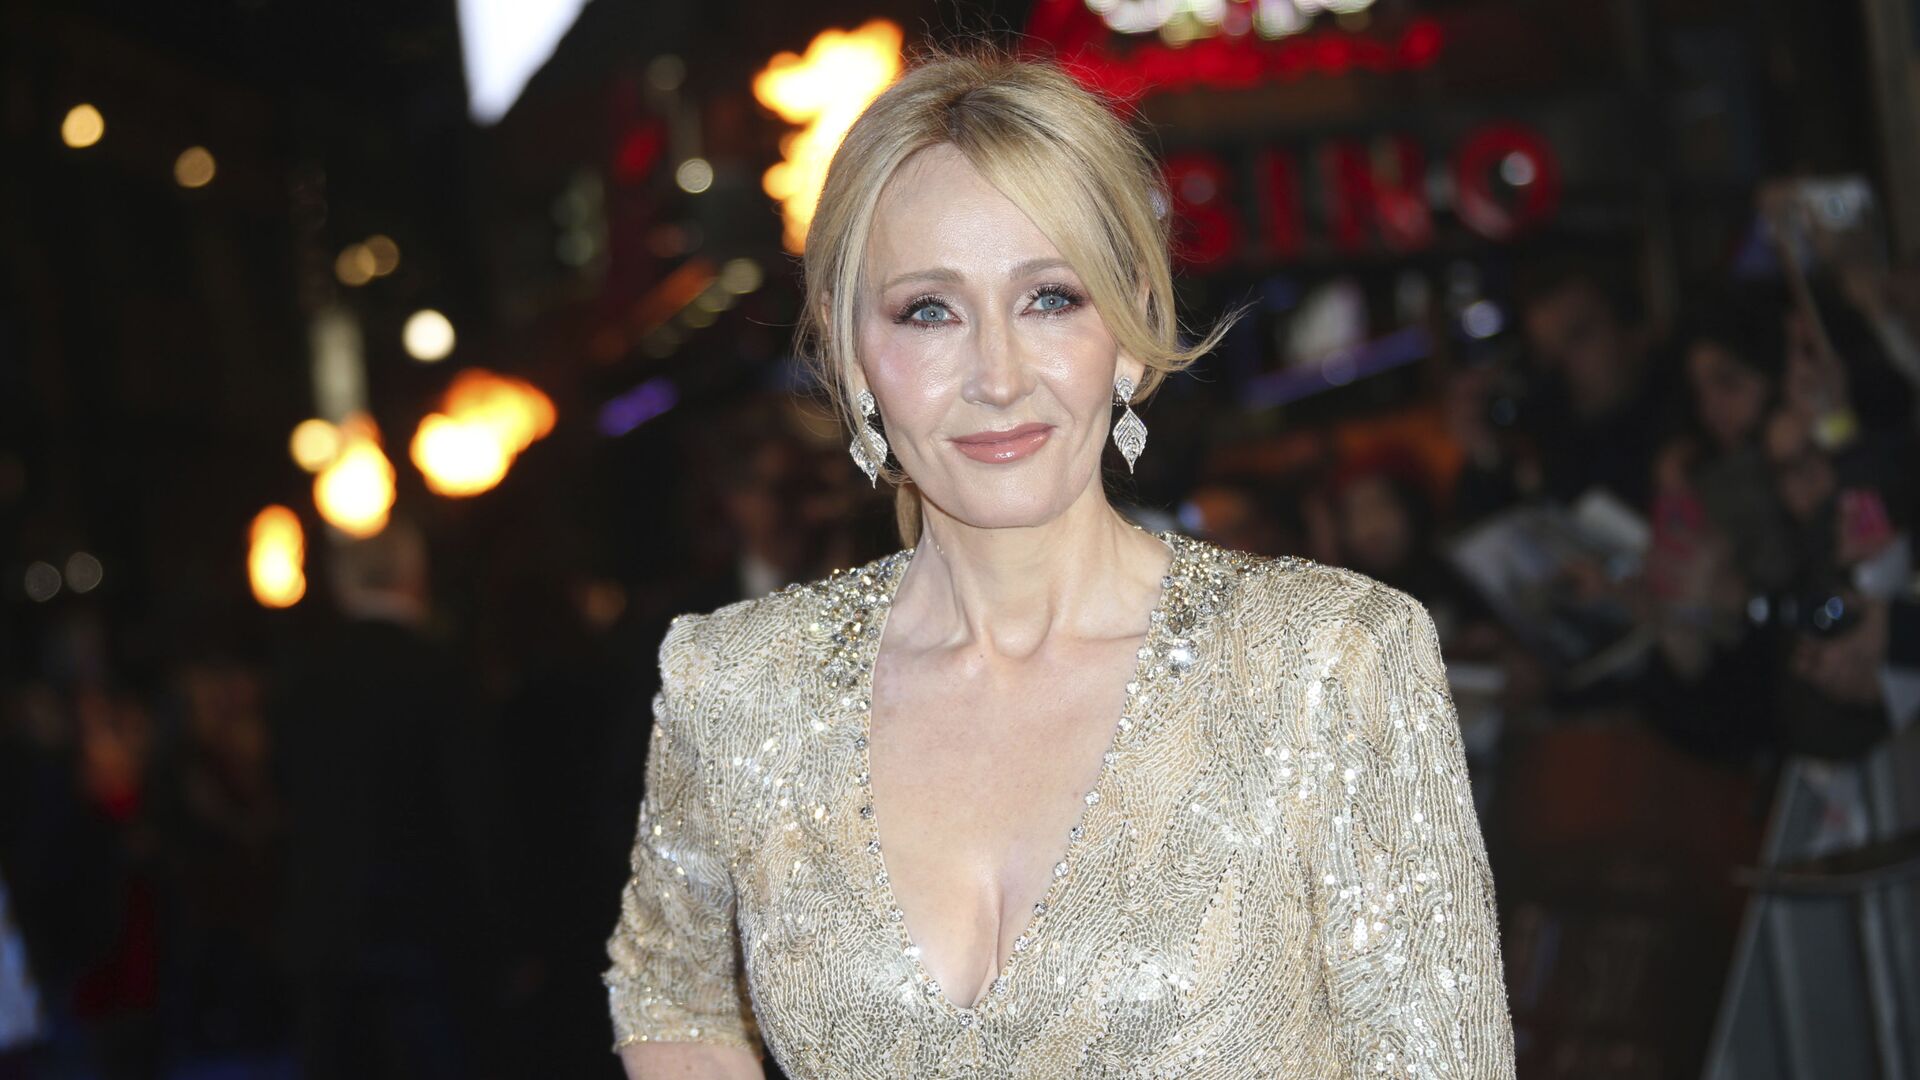 Author J.K. Rowling poses for photographers upon arrival at the premiere of the film 'Fantastic Beasts And Where To Find Them' in London, Tuesday, Nov. 15, 2016.  - Sputnik International, 1920, 23.04.2022